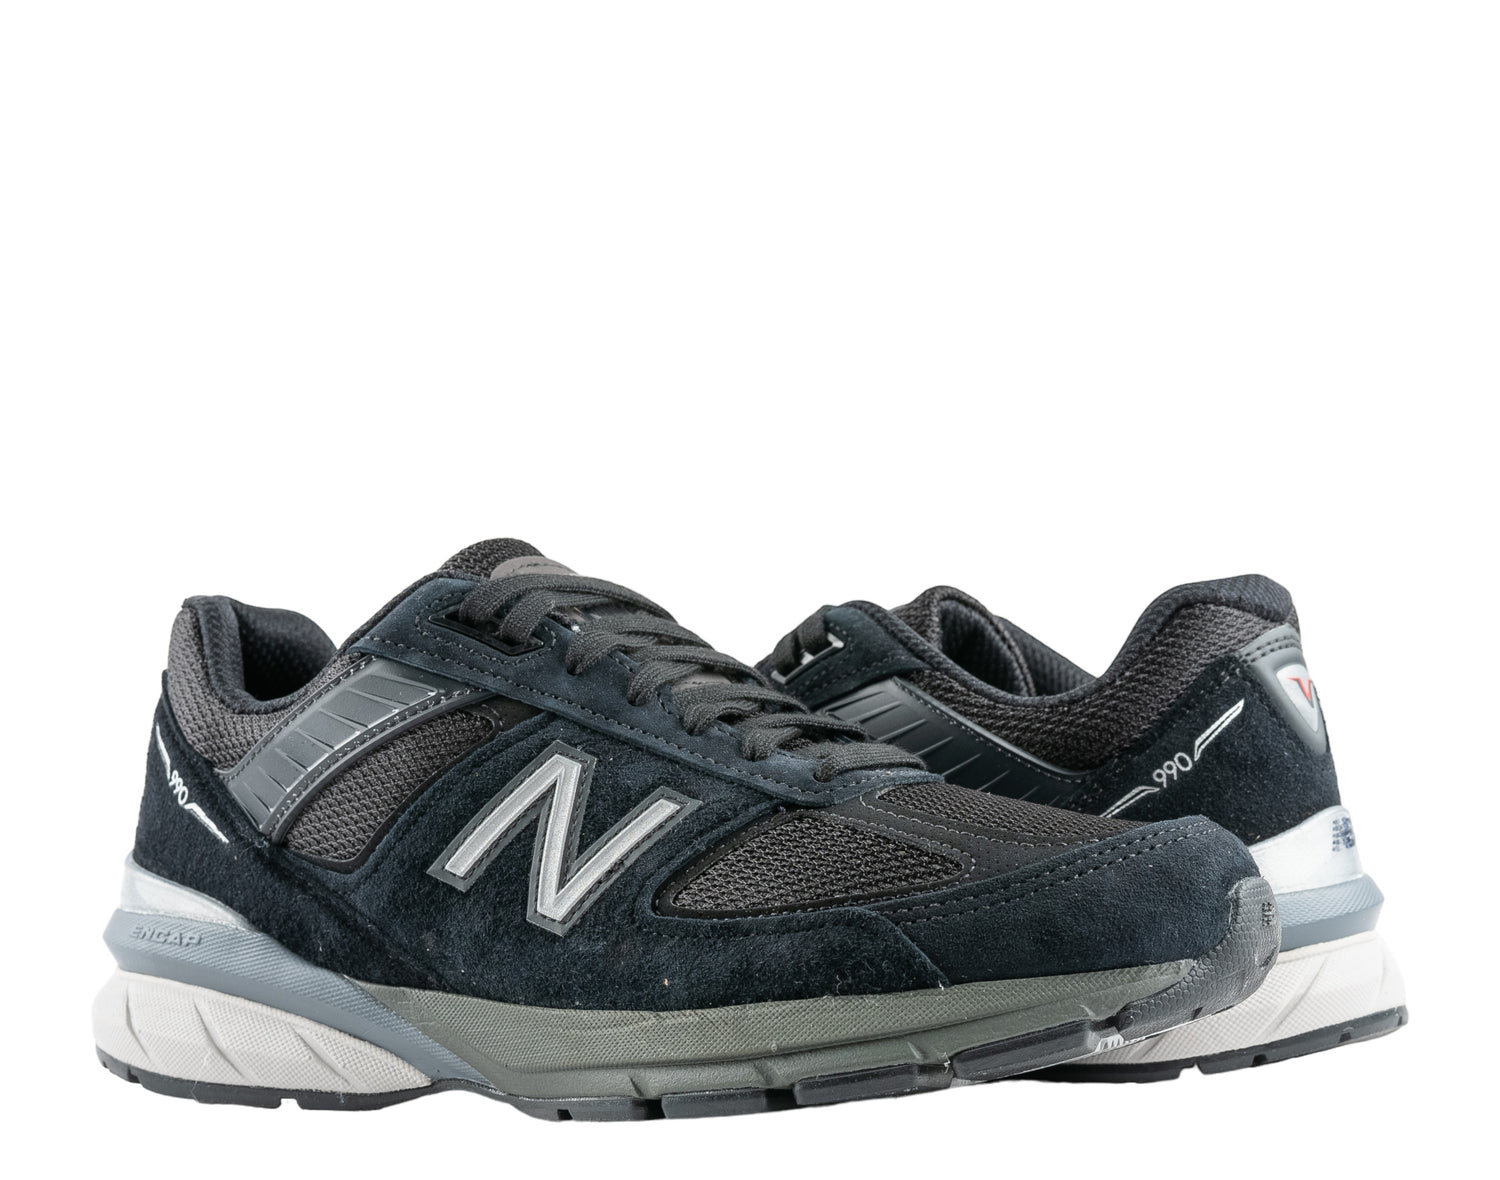 New Balance 990v5 Made In USA Men's Running Shoes